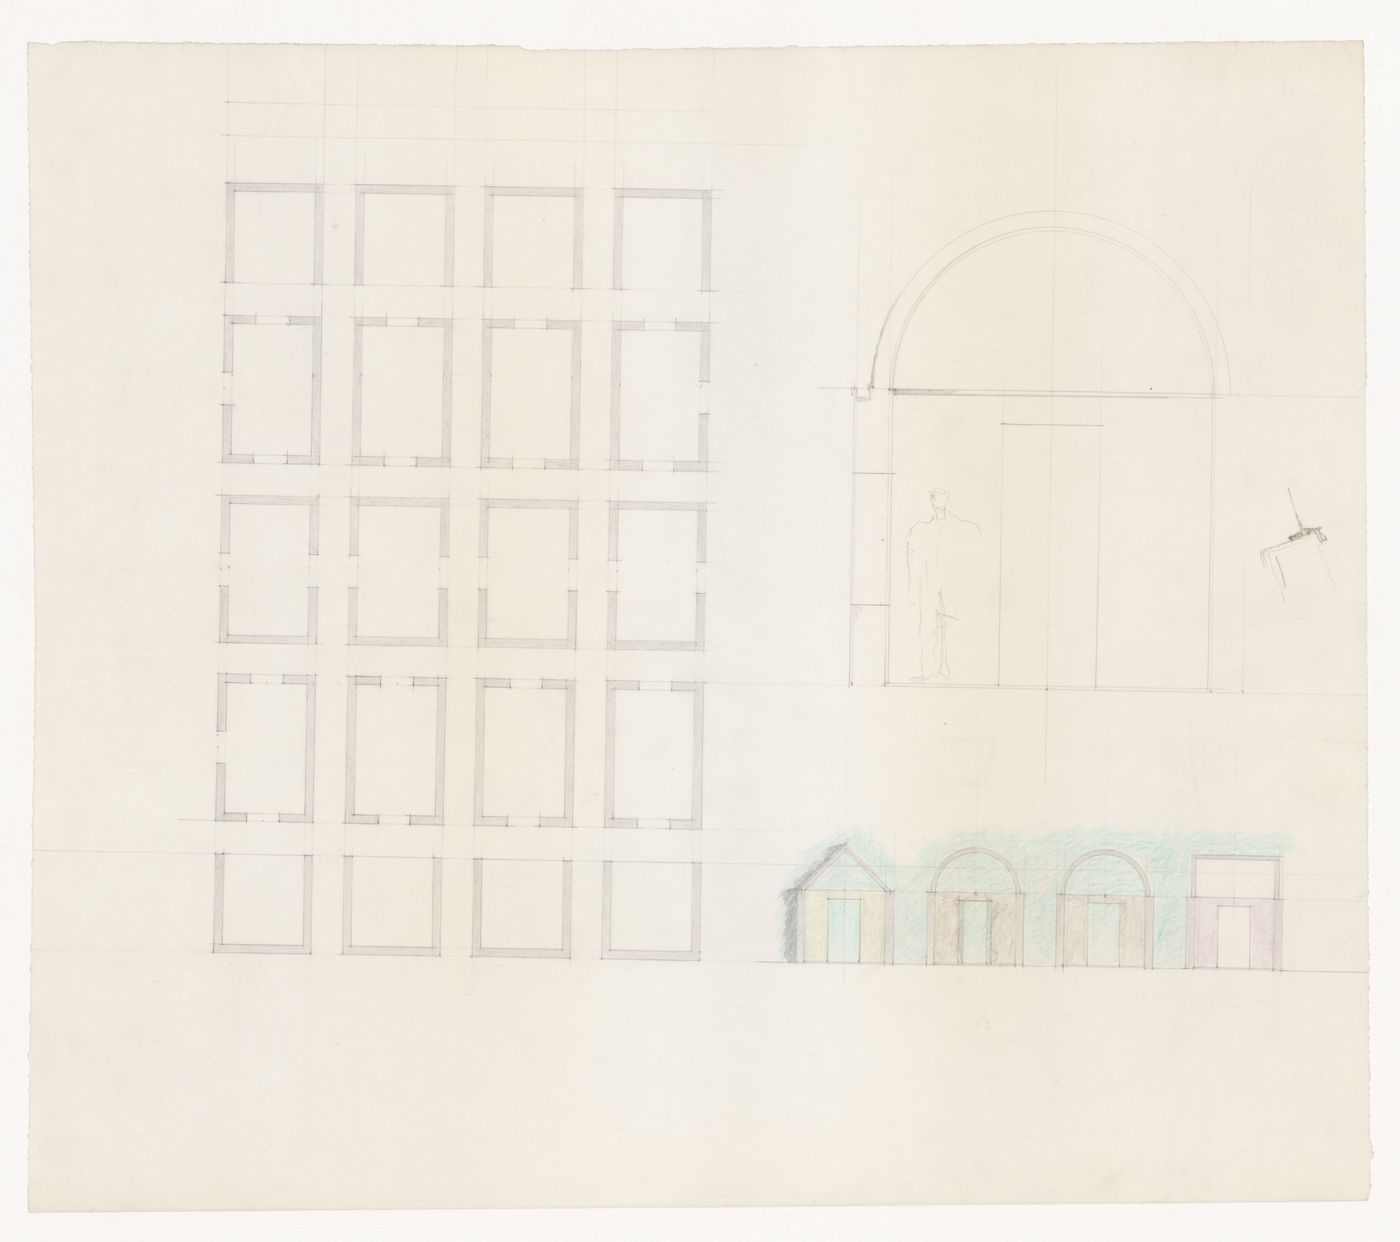 Plan and elevations for New Town for the New Orthodox